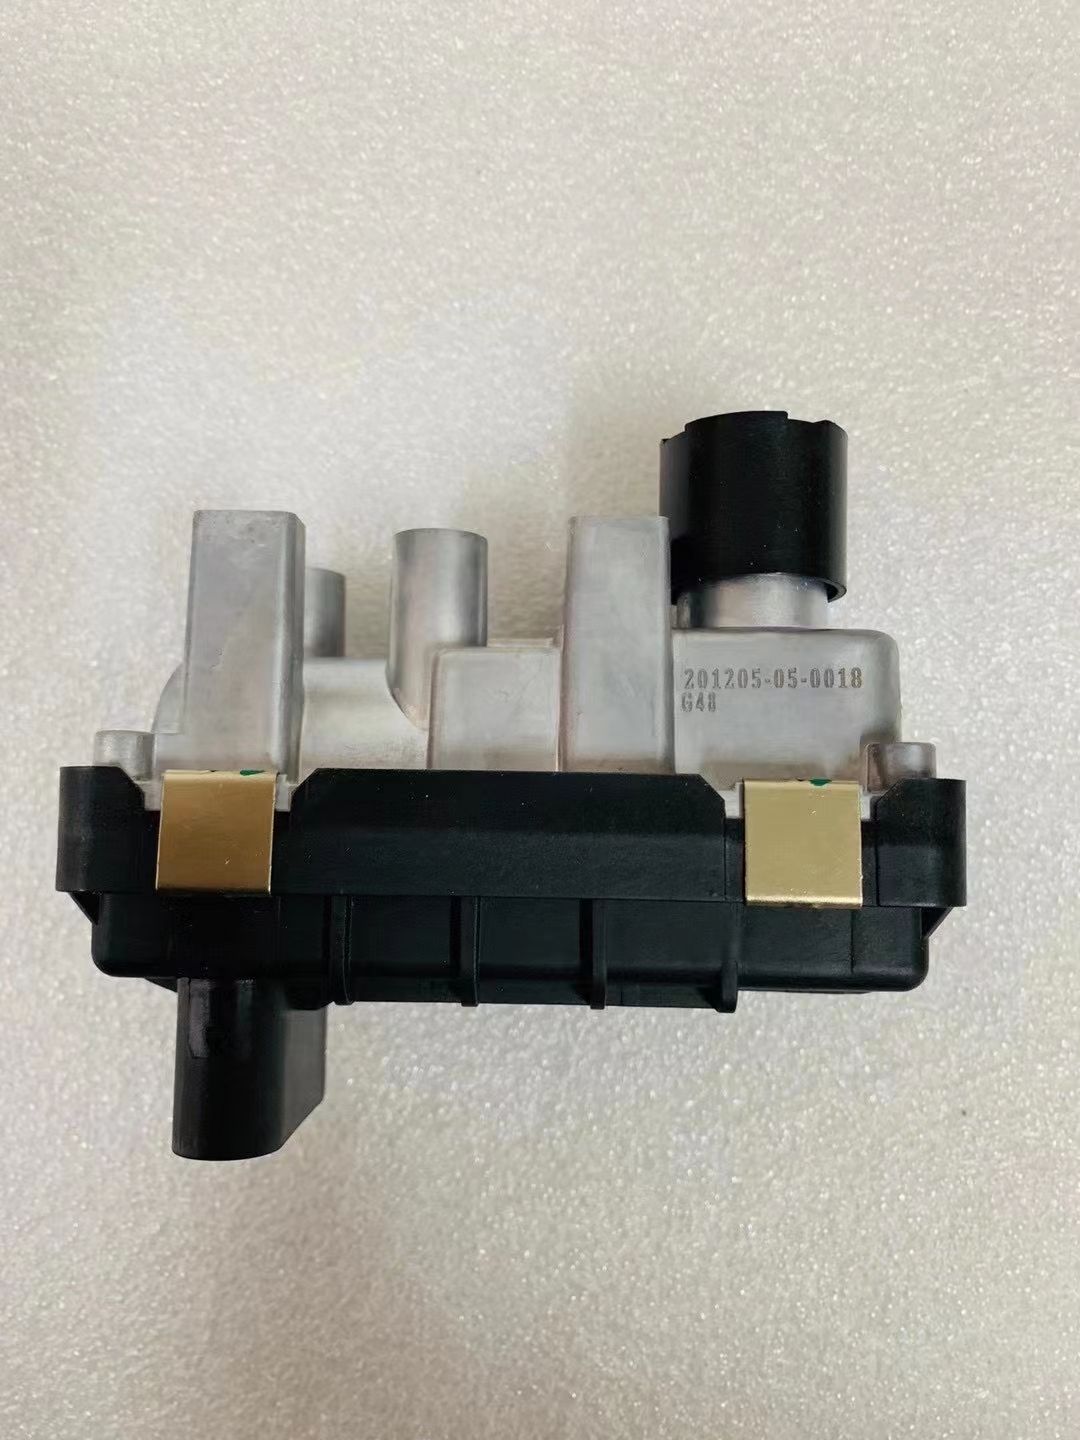 G-048 763797 6NW009543 6NW009206 Turbo Electronic Actuator 823024-4 752406 V348 Turboladdare